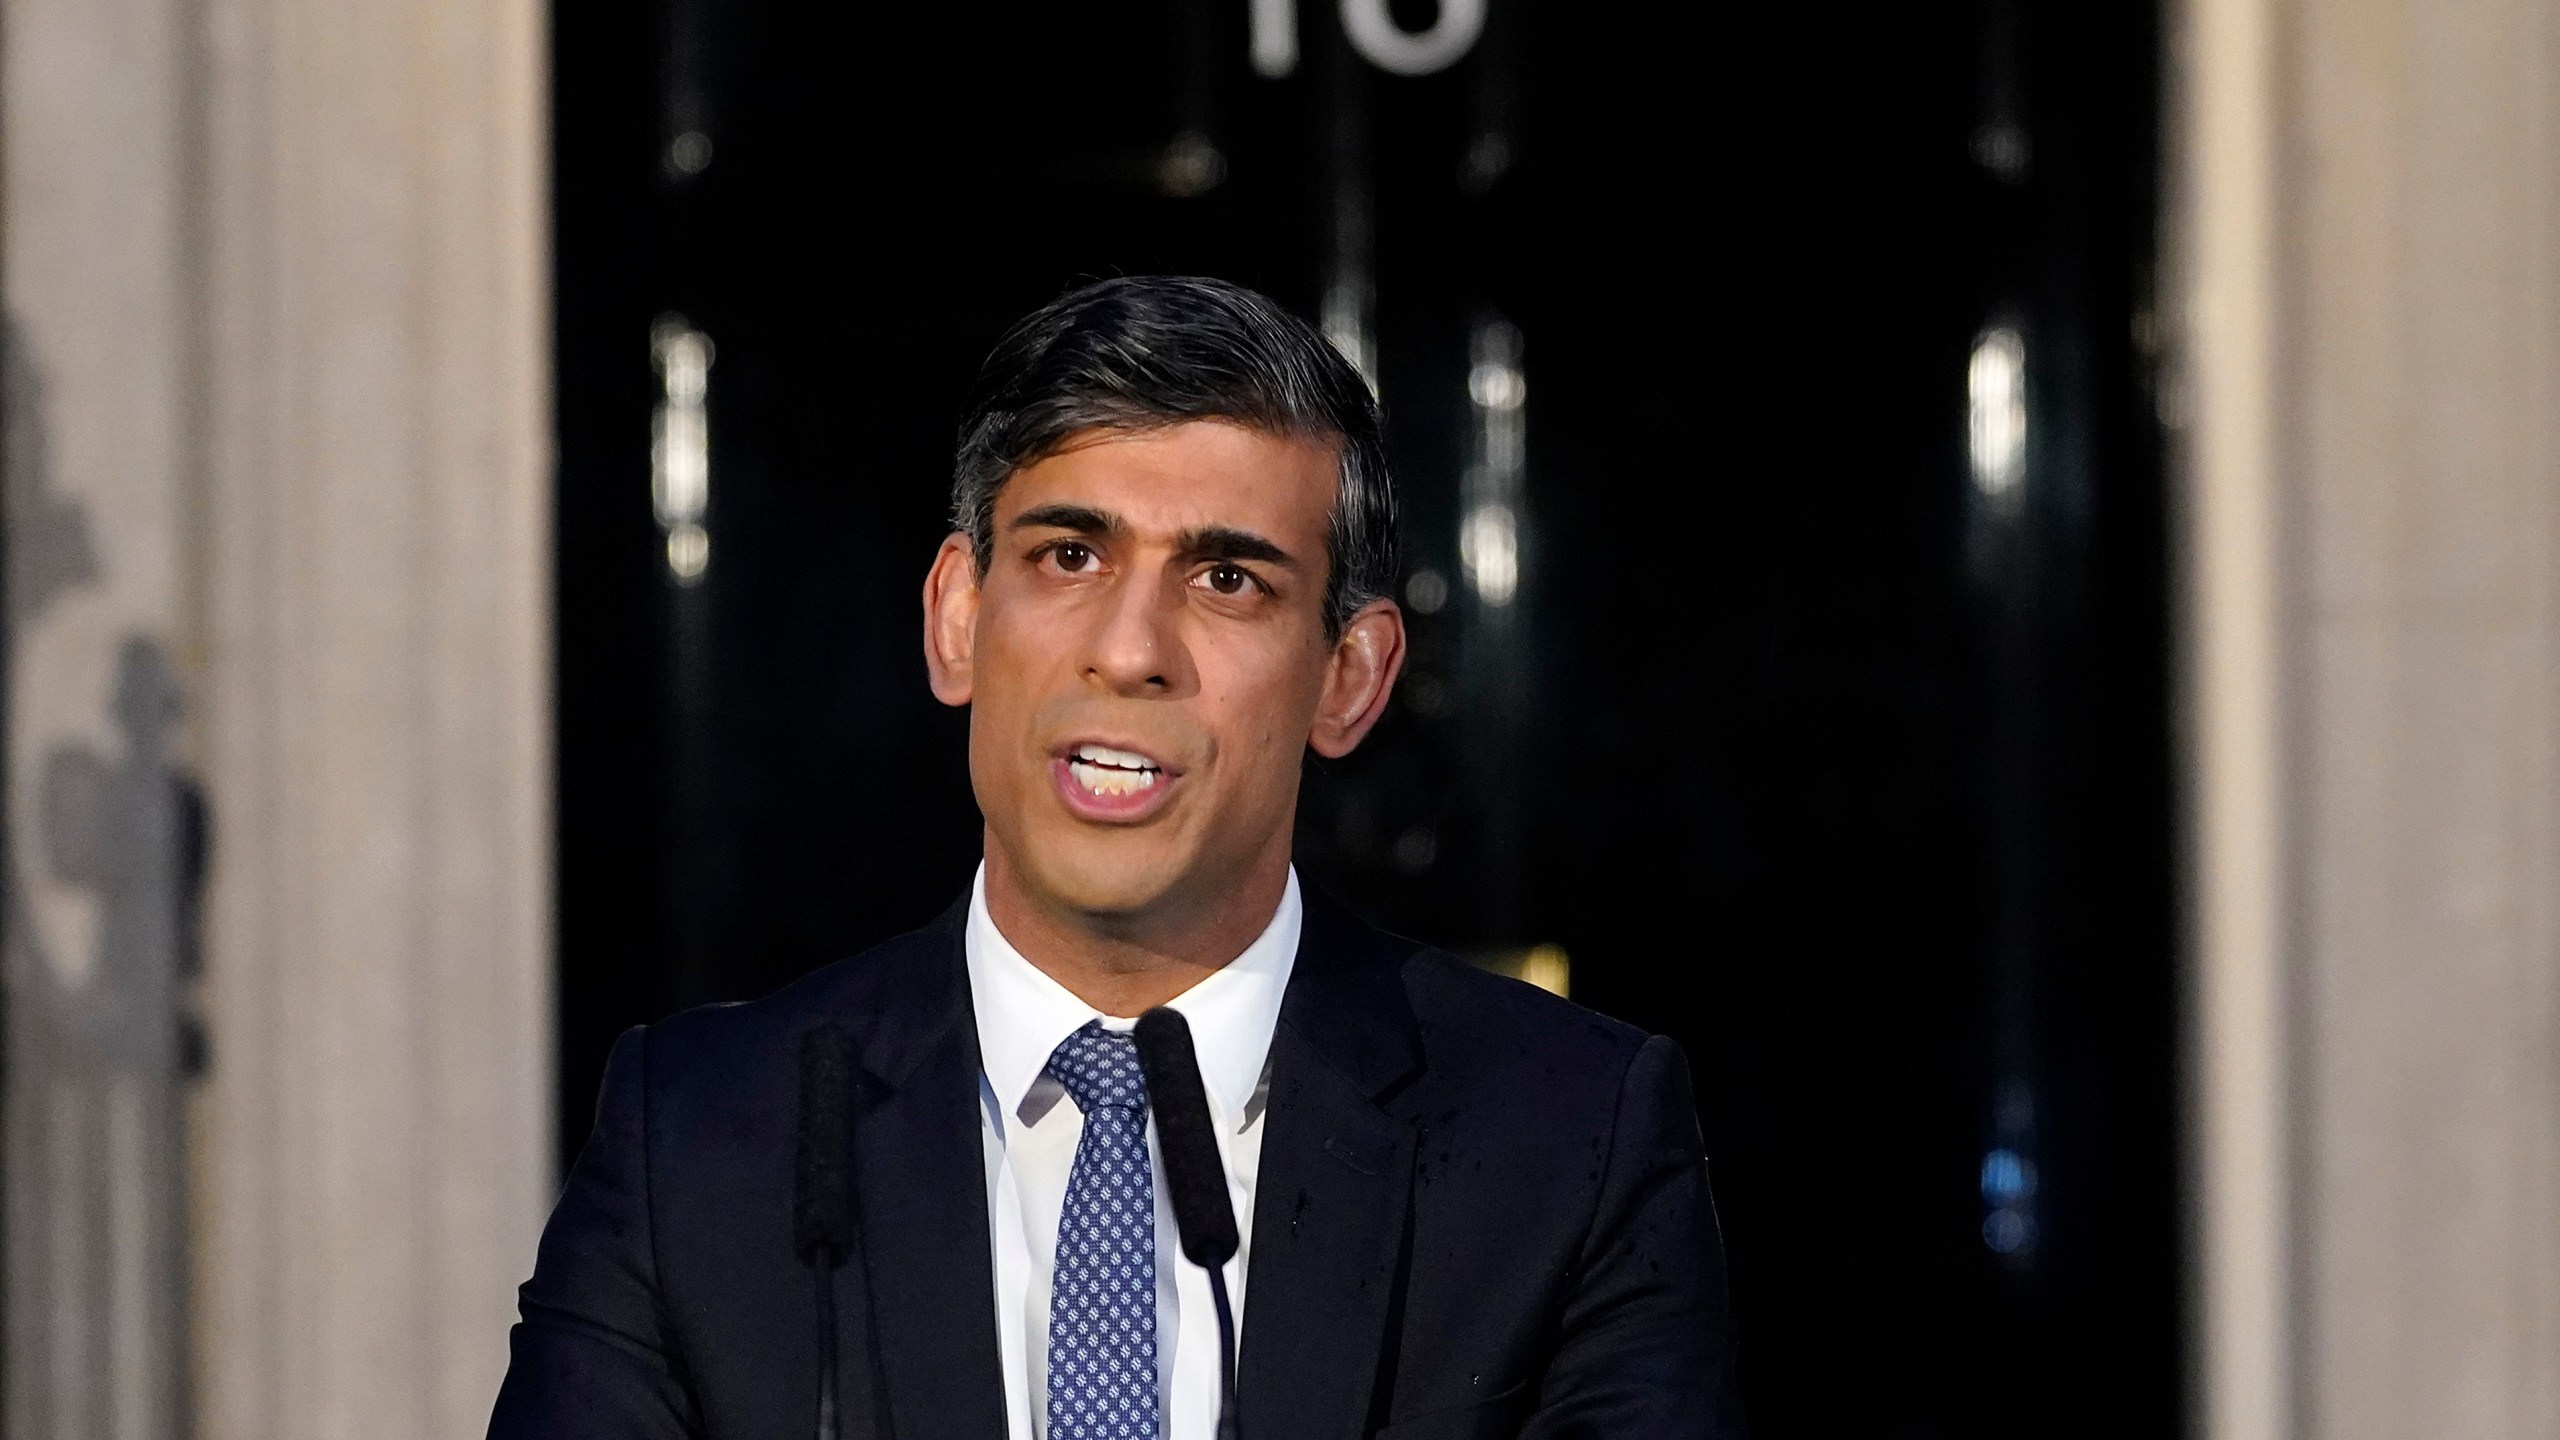 Britain's Prime Minister Rishi Sunak addresses the media at Downing Street in London, on March 1, 2024. Britain’s main opposition parties are demanding that the Conservative government publish legal advice it has received on whether Israel has broken international humanitarian law during the war in Gaza. They say the U.K. should ban weapons sales to Israel if the law has been broken. (AP Photo/Alberto Pezzali)